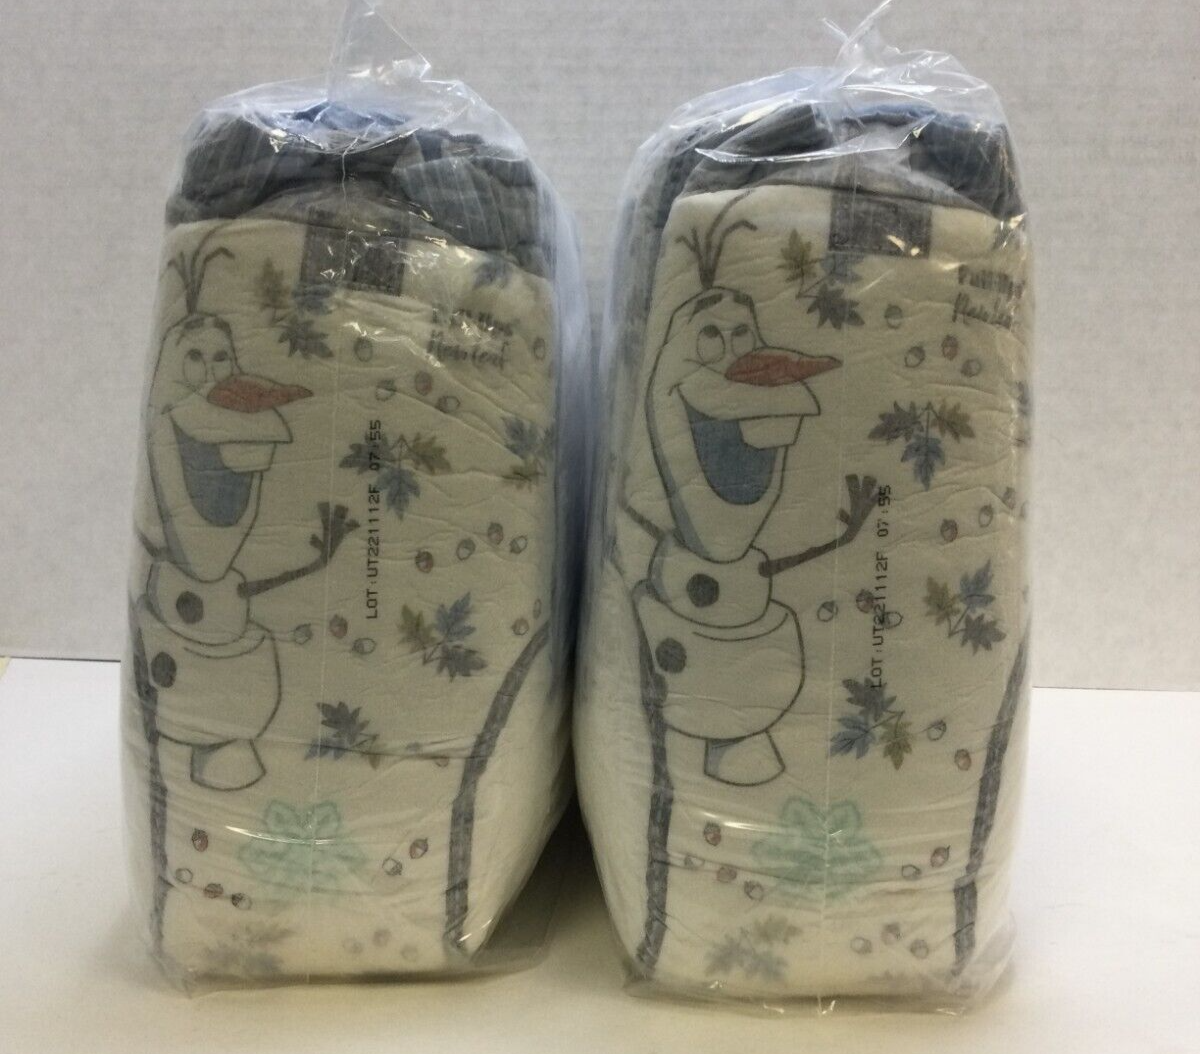 Pull Ups-Frozen Theme-Size 3T-4T-2 Packs-67 Count Free Shipping Pull-Ups does not apply